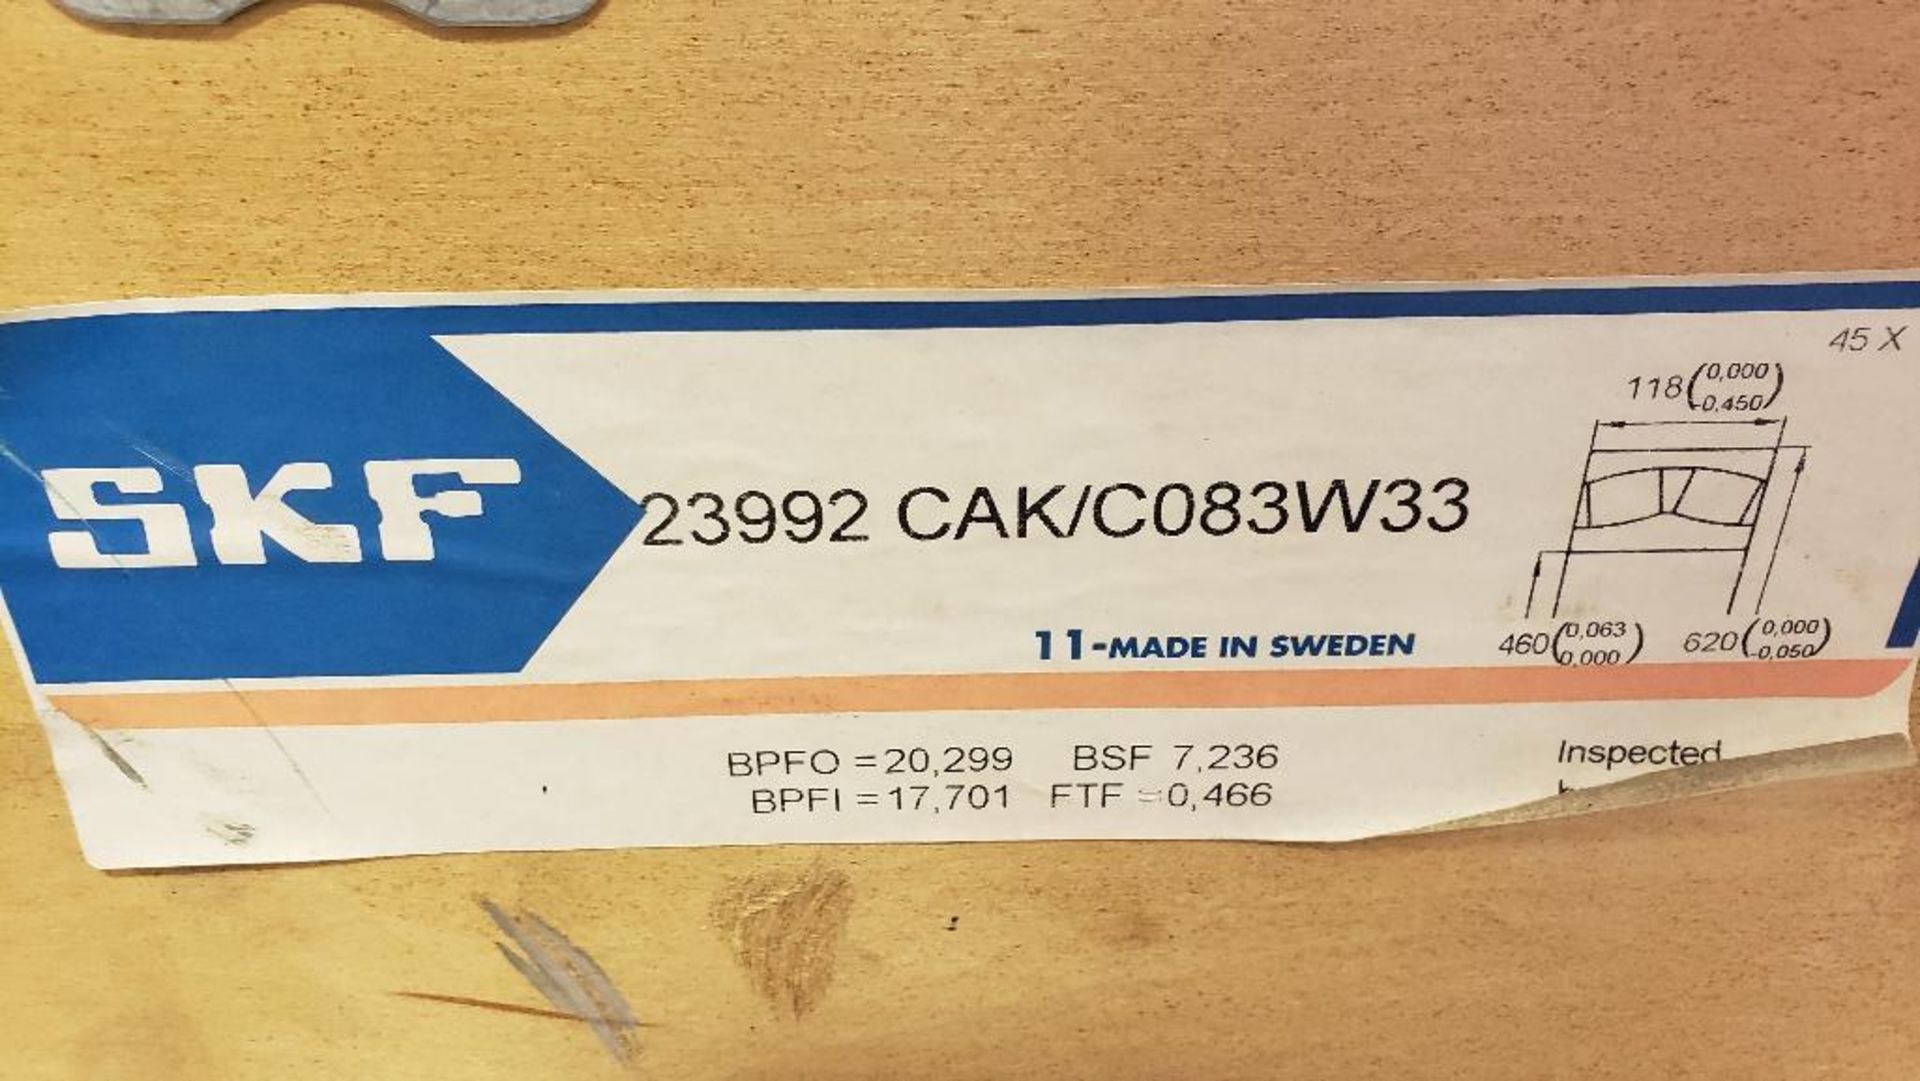 SKF super precision large capacity bearing. Part number 23992 CAK/C083W33. New in crate. - Image 2 of 6